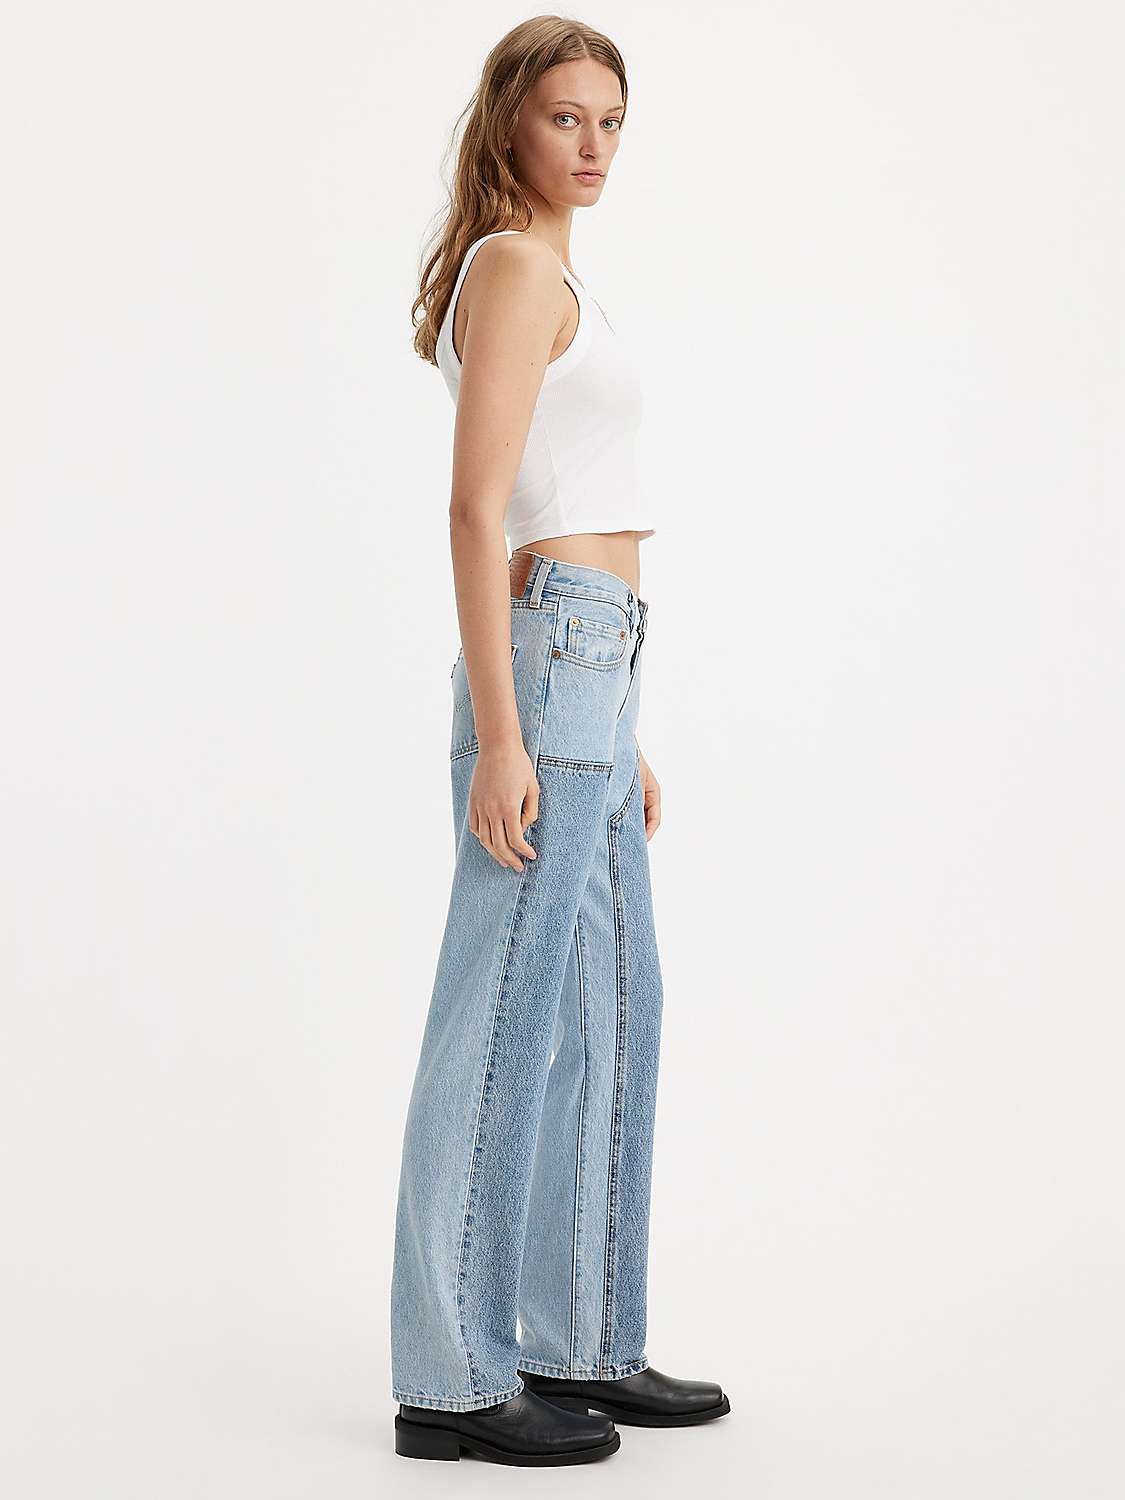 Buy Levi's 501 90's Chaps Jeans, Done And Dusted Online at johnlewis.com